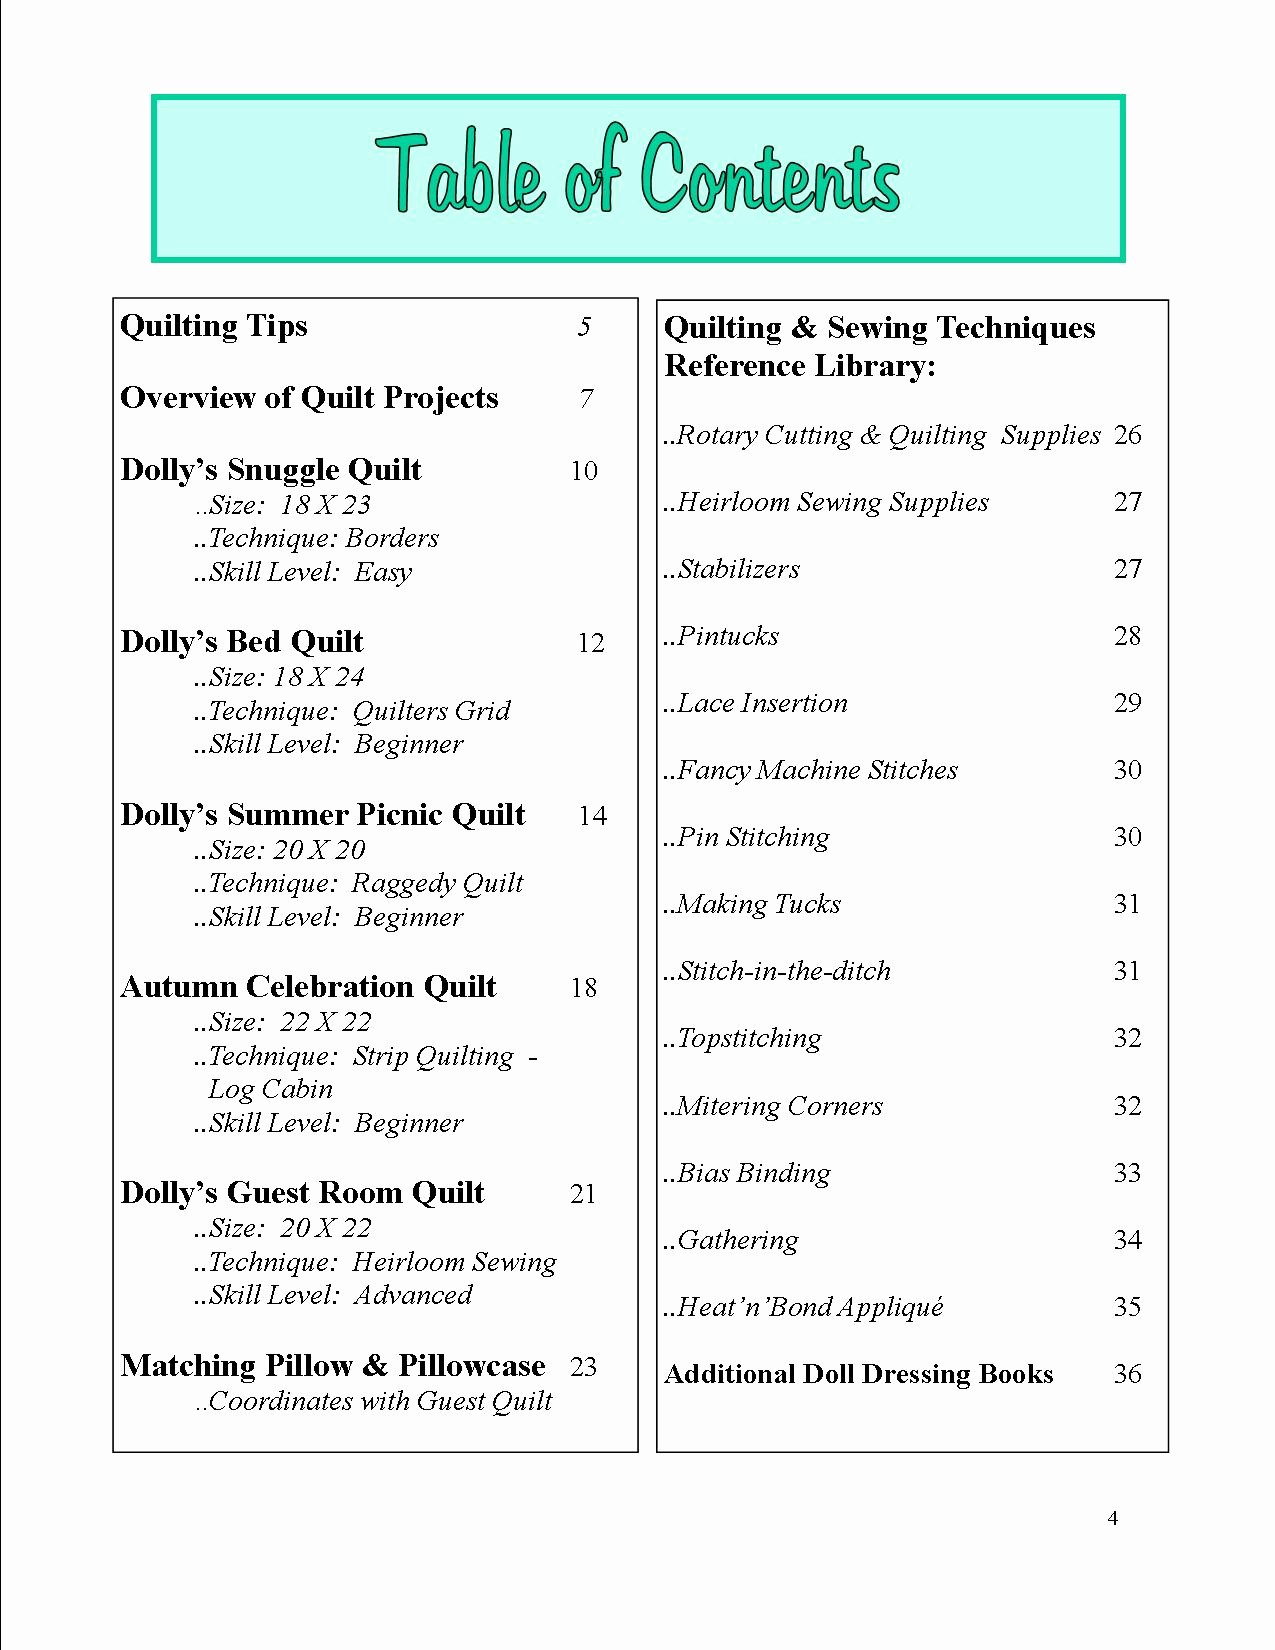 Table Of Contents Sample Page Lovely Dolly’s Favorite Quilts – Sample Pages Doll Clothing Patterns